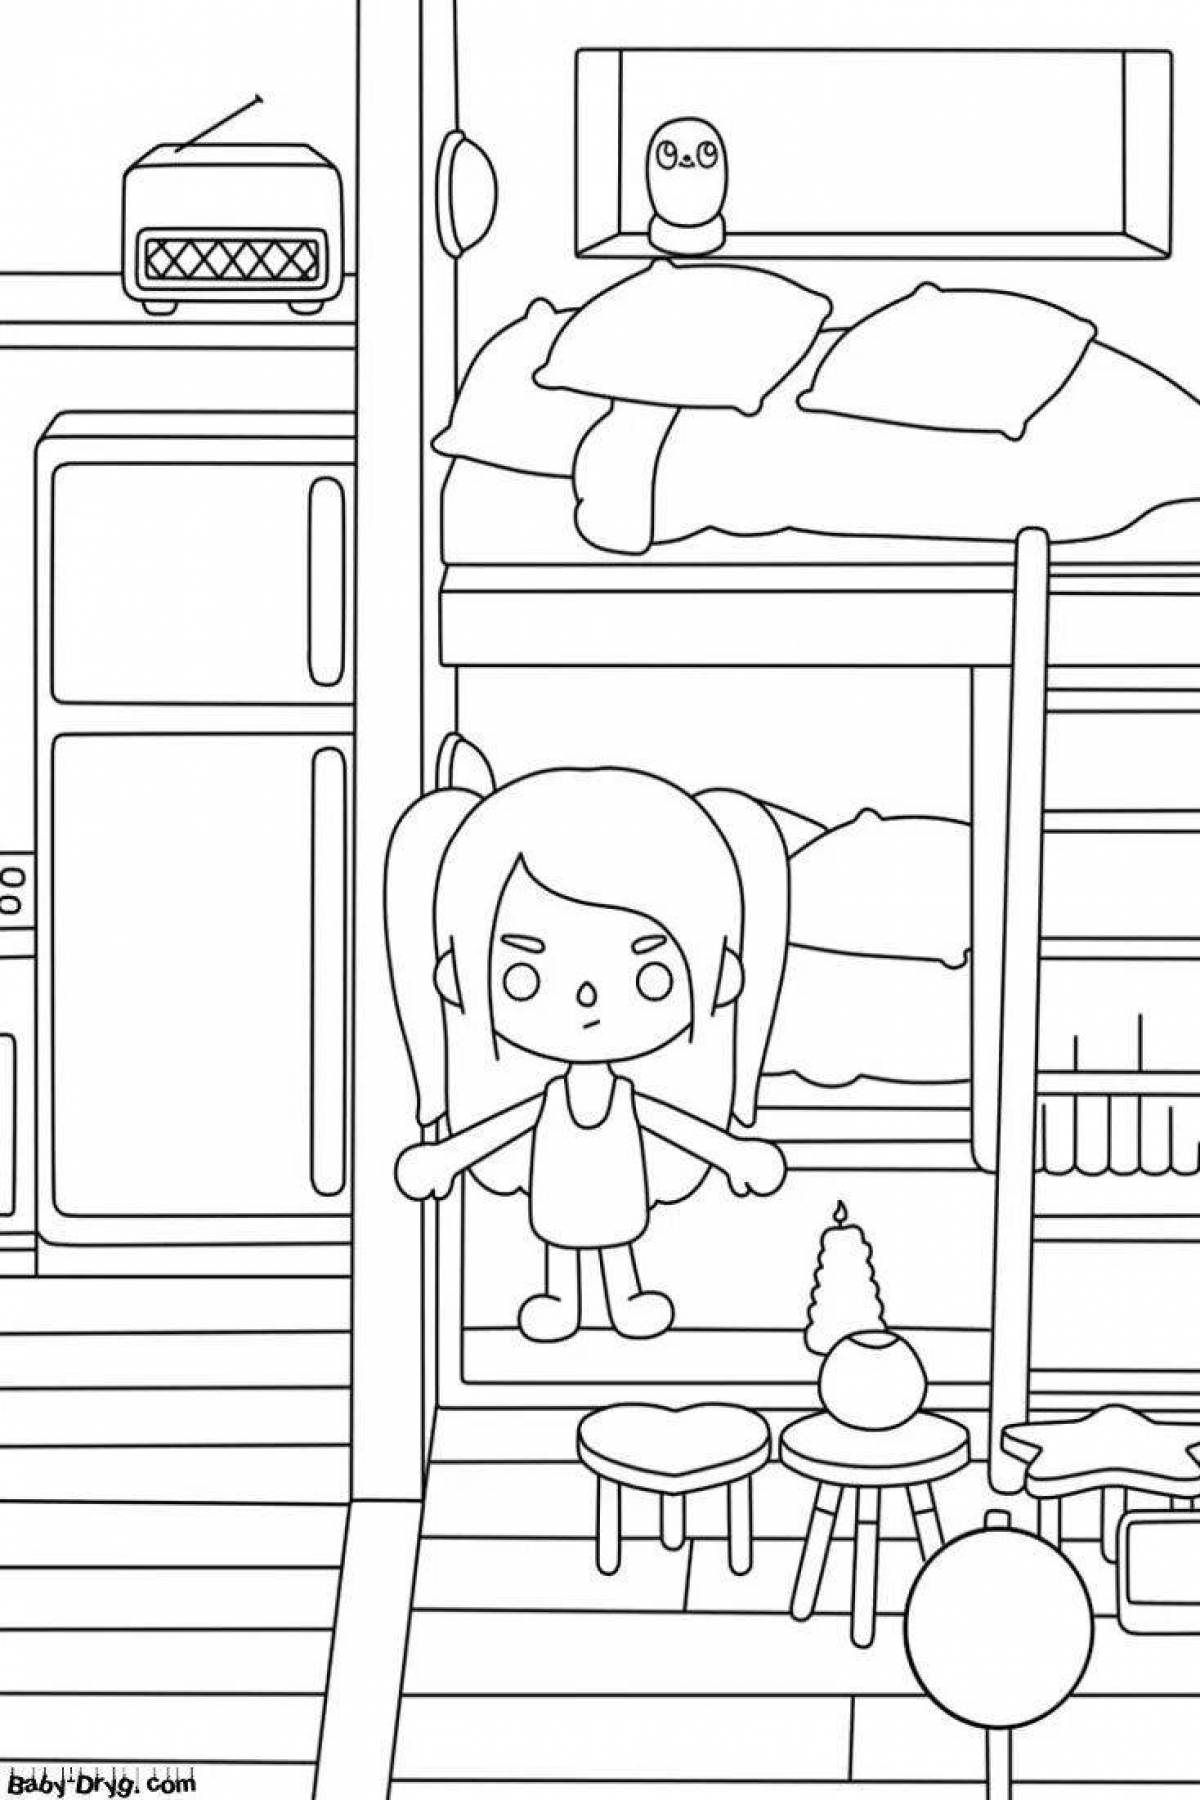 Superb side cutter coloring page